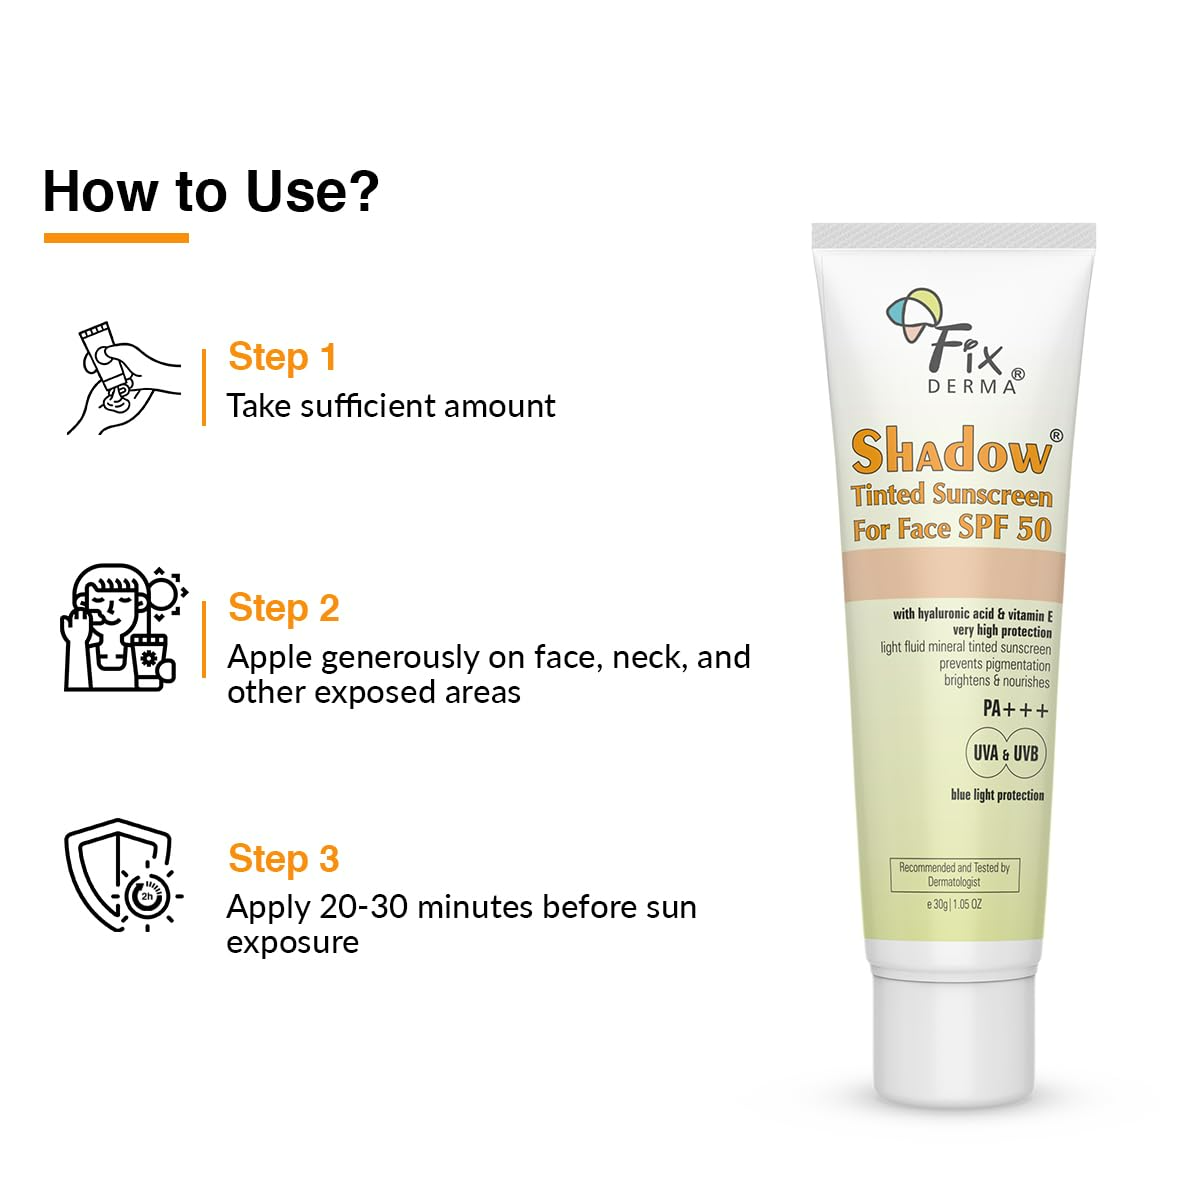 Fixderma Shadow Rx Tinted Sunscreen